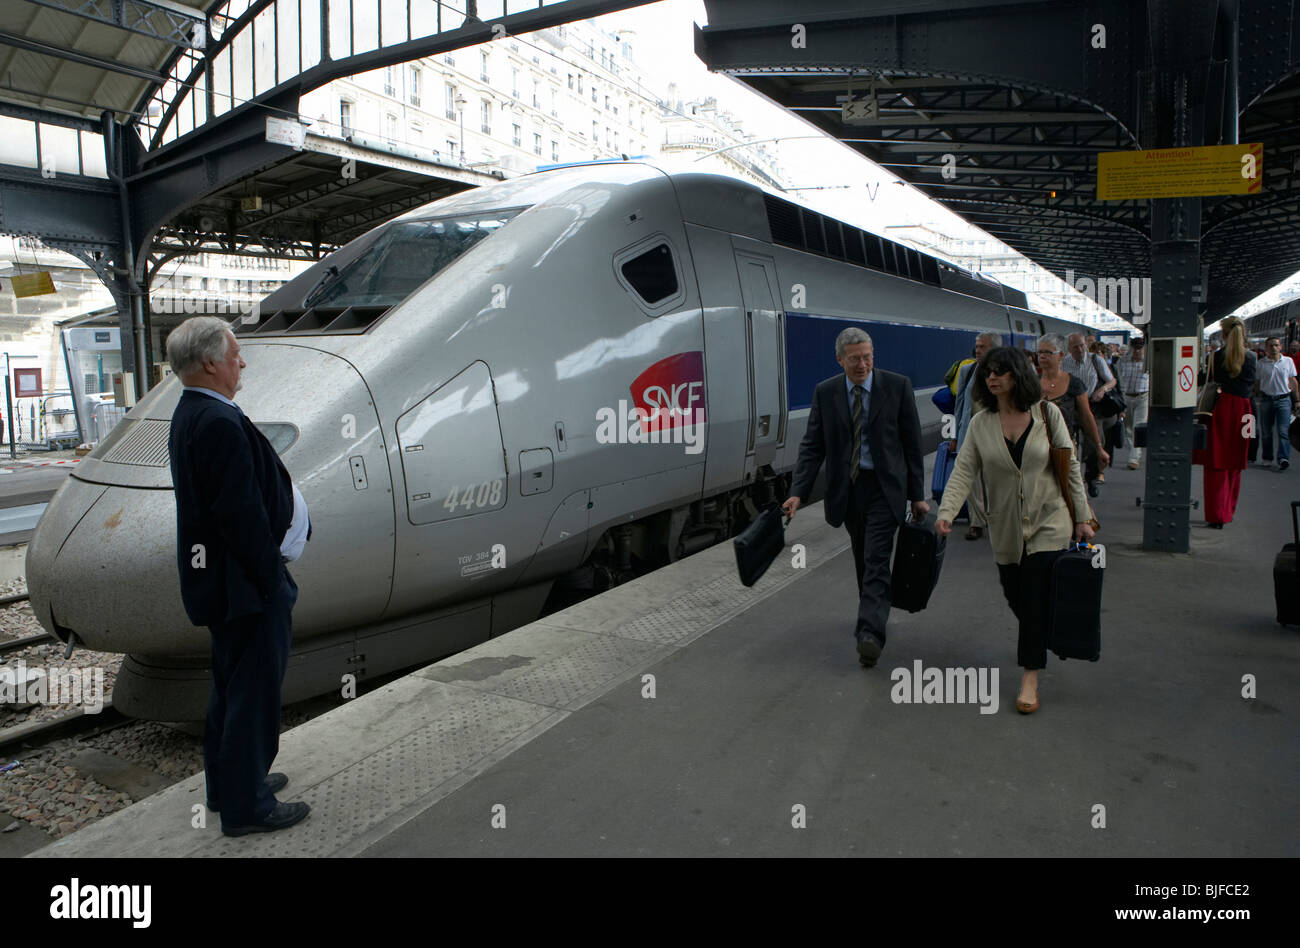 A TGV train on a station in Paris, France Stock Photo